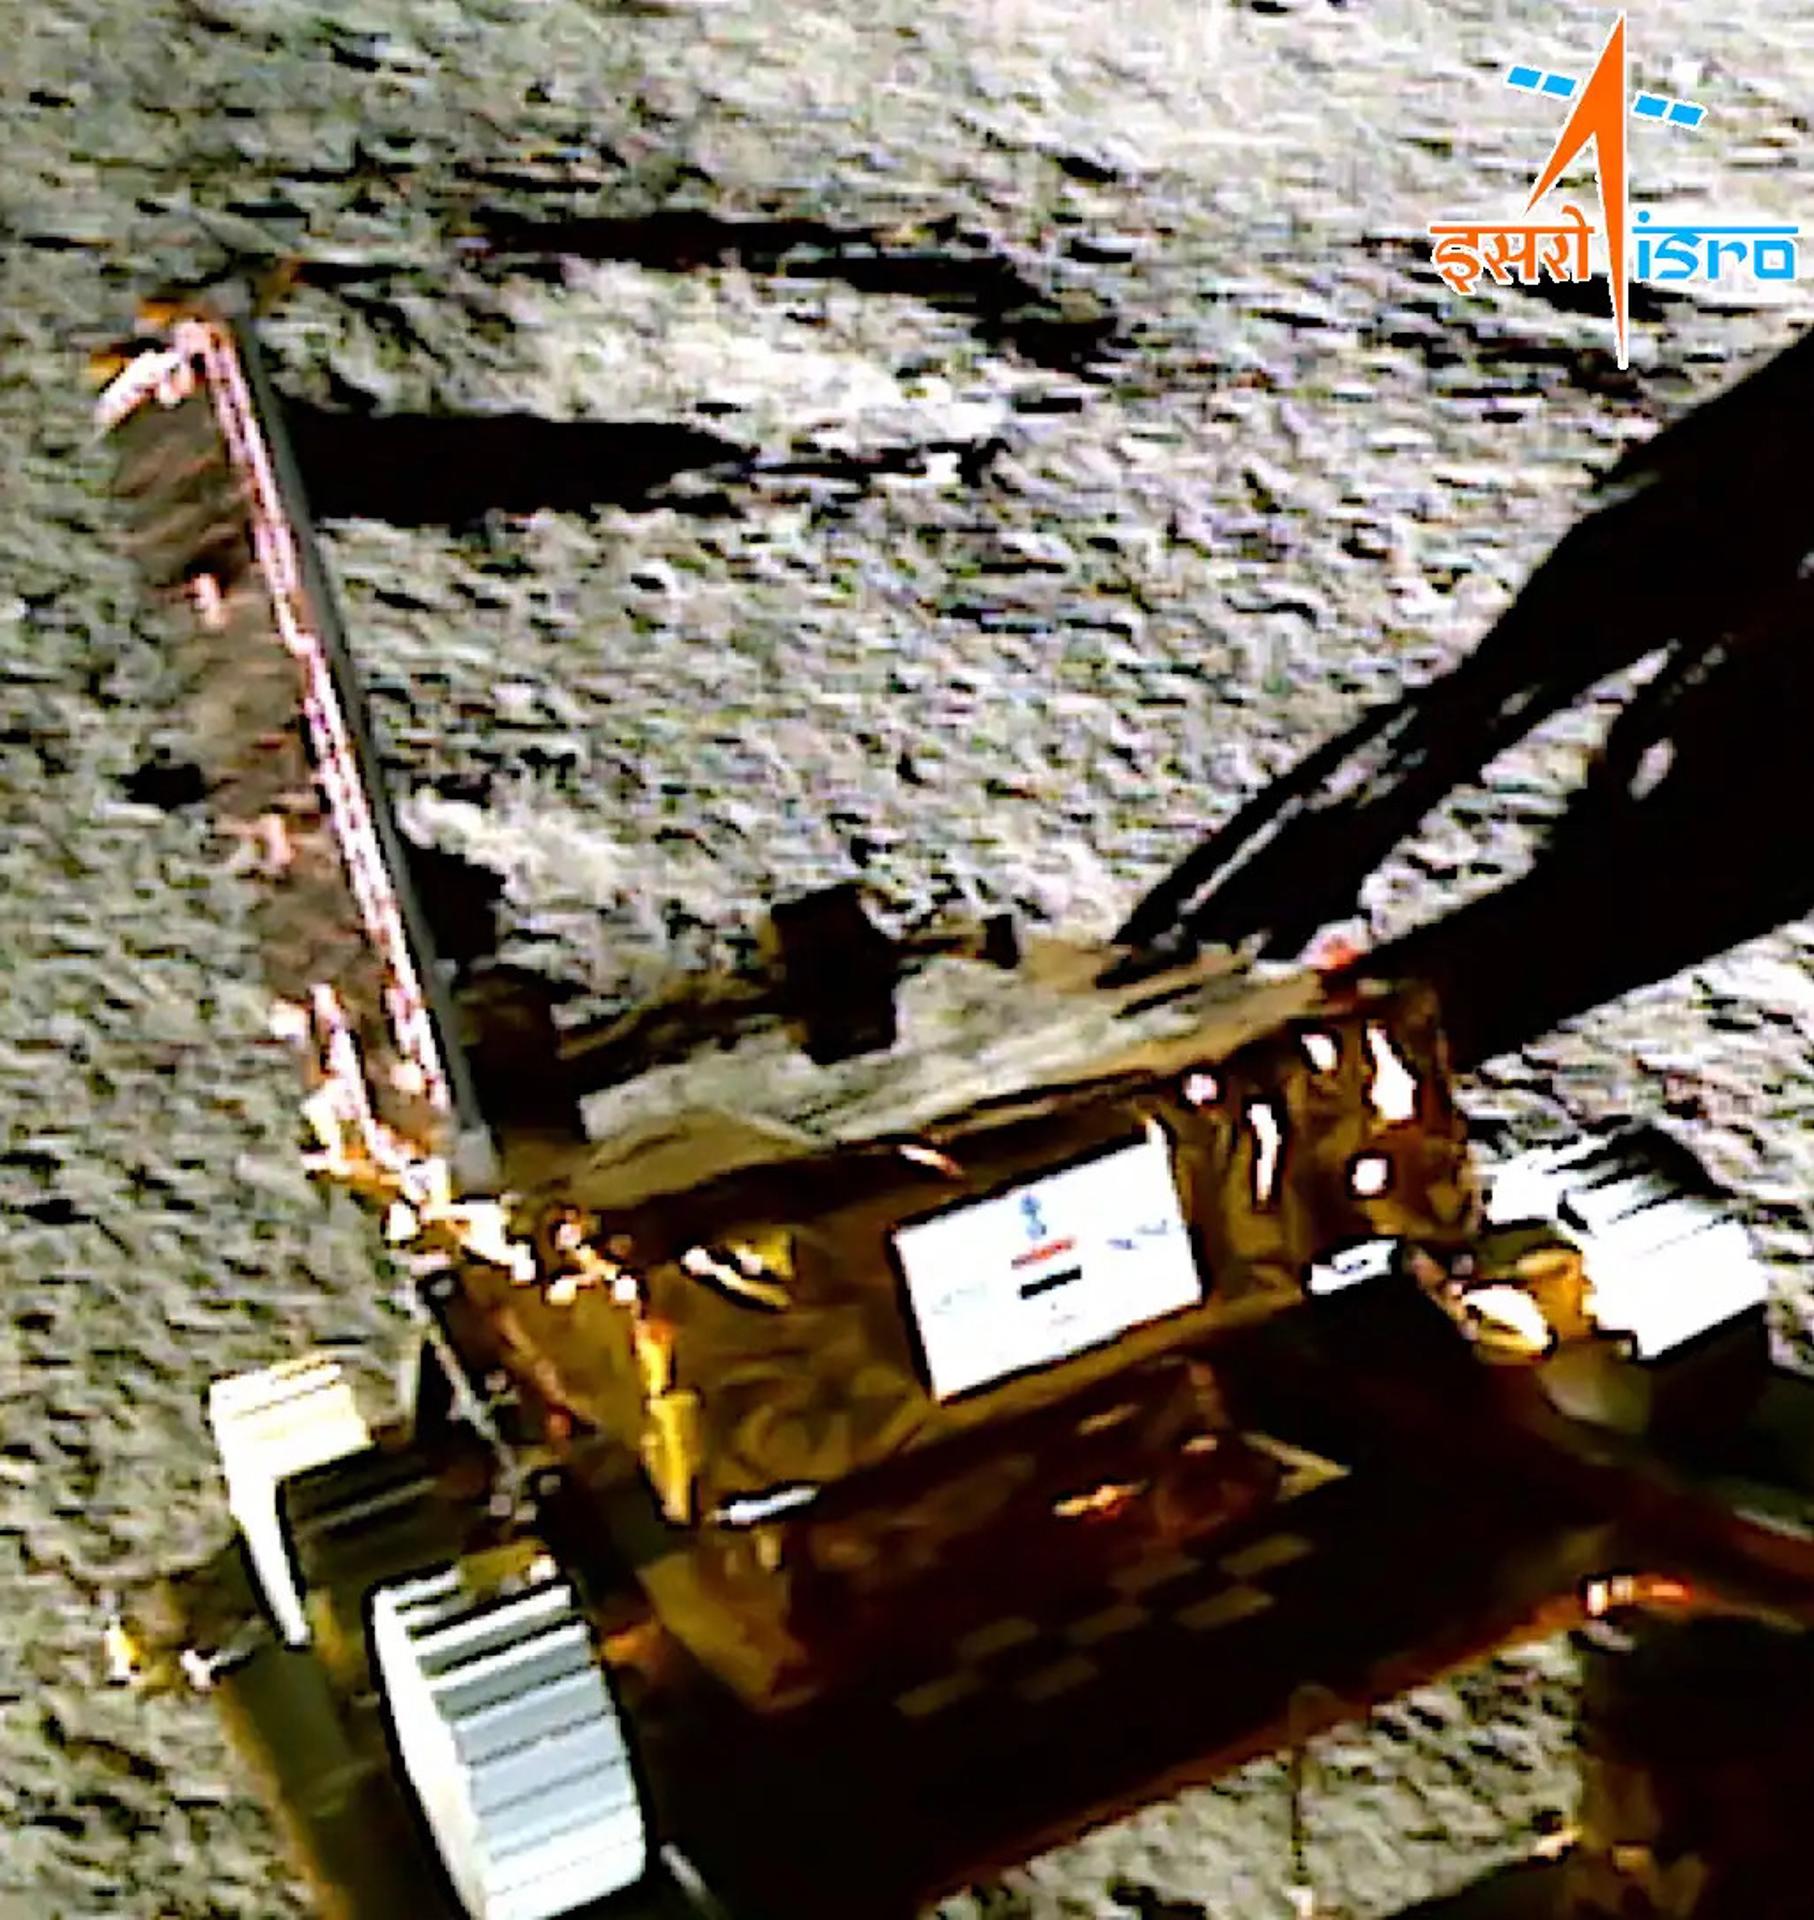 A handout photo made available on 29 August 2023 by the Indian Space Research Organisation (ISRO) shows the Rover of India's Chandrayaan-3 lunar mission retracing its path and safely heading in a new direction, on the Moon. EFE-EPA/ISRO HANDOUT BEST QUALITY AVAILABLE HANDOUT EDITORIAL USE ONLY/NO SALES